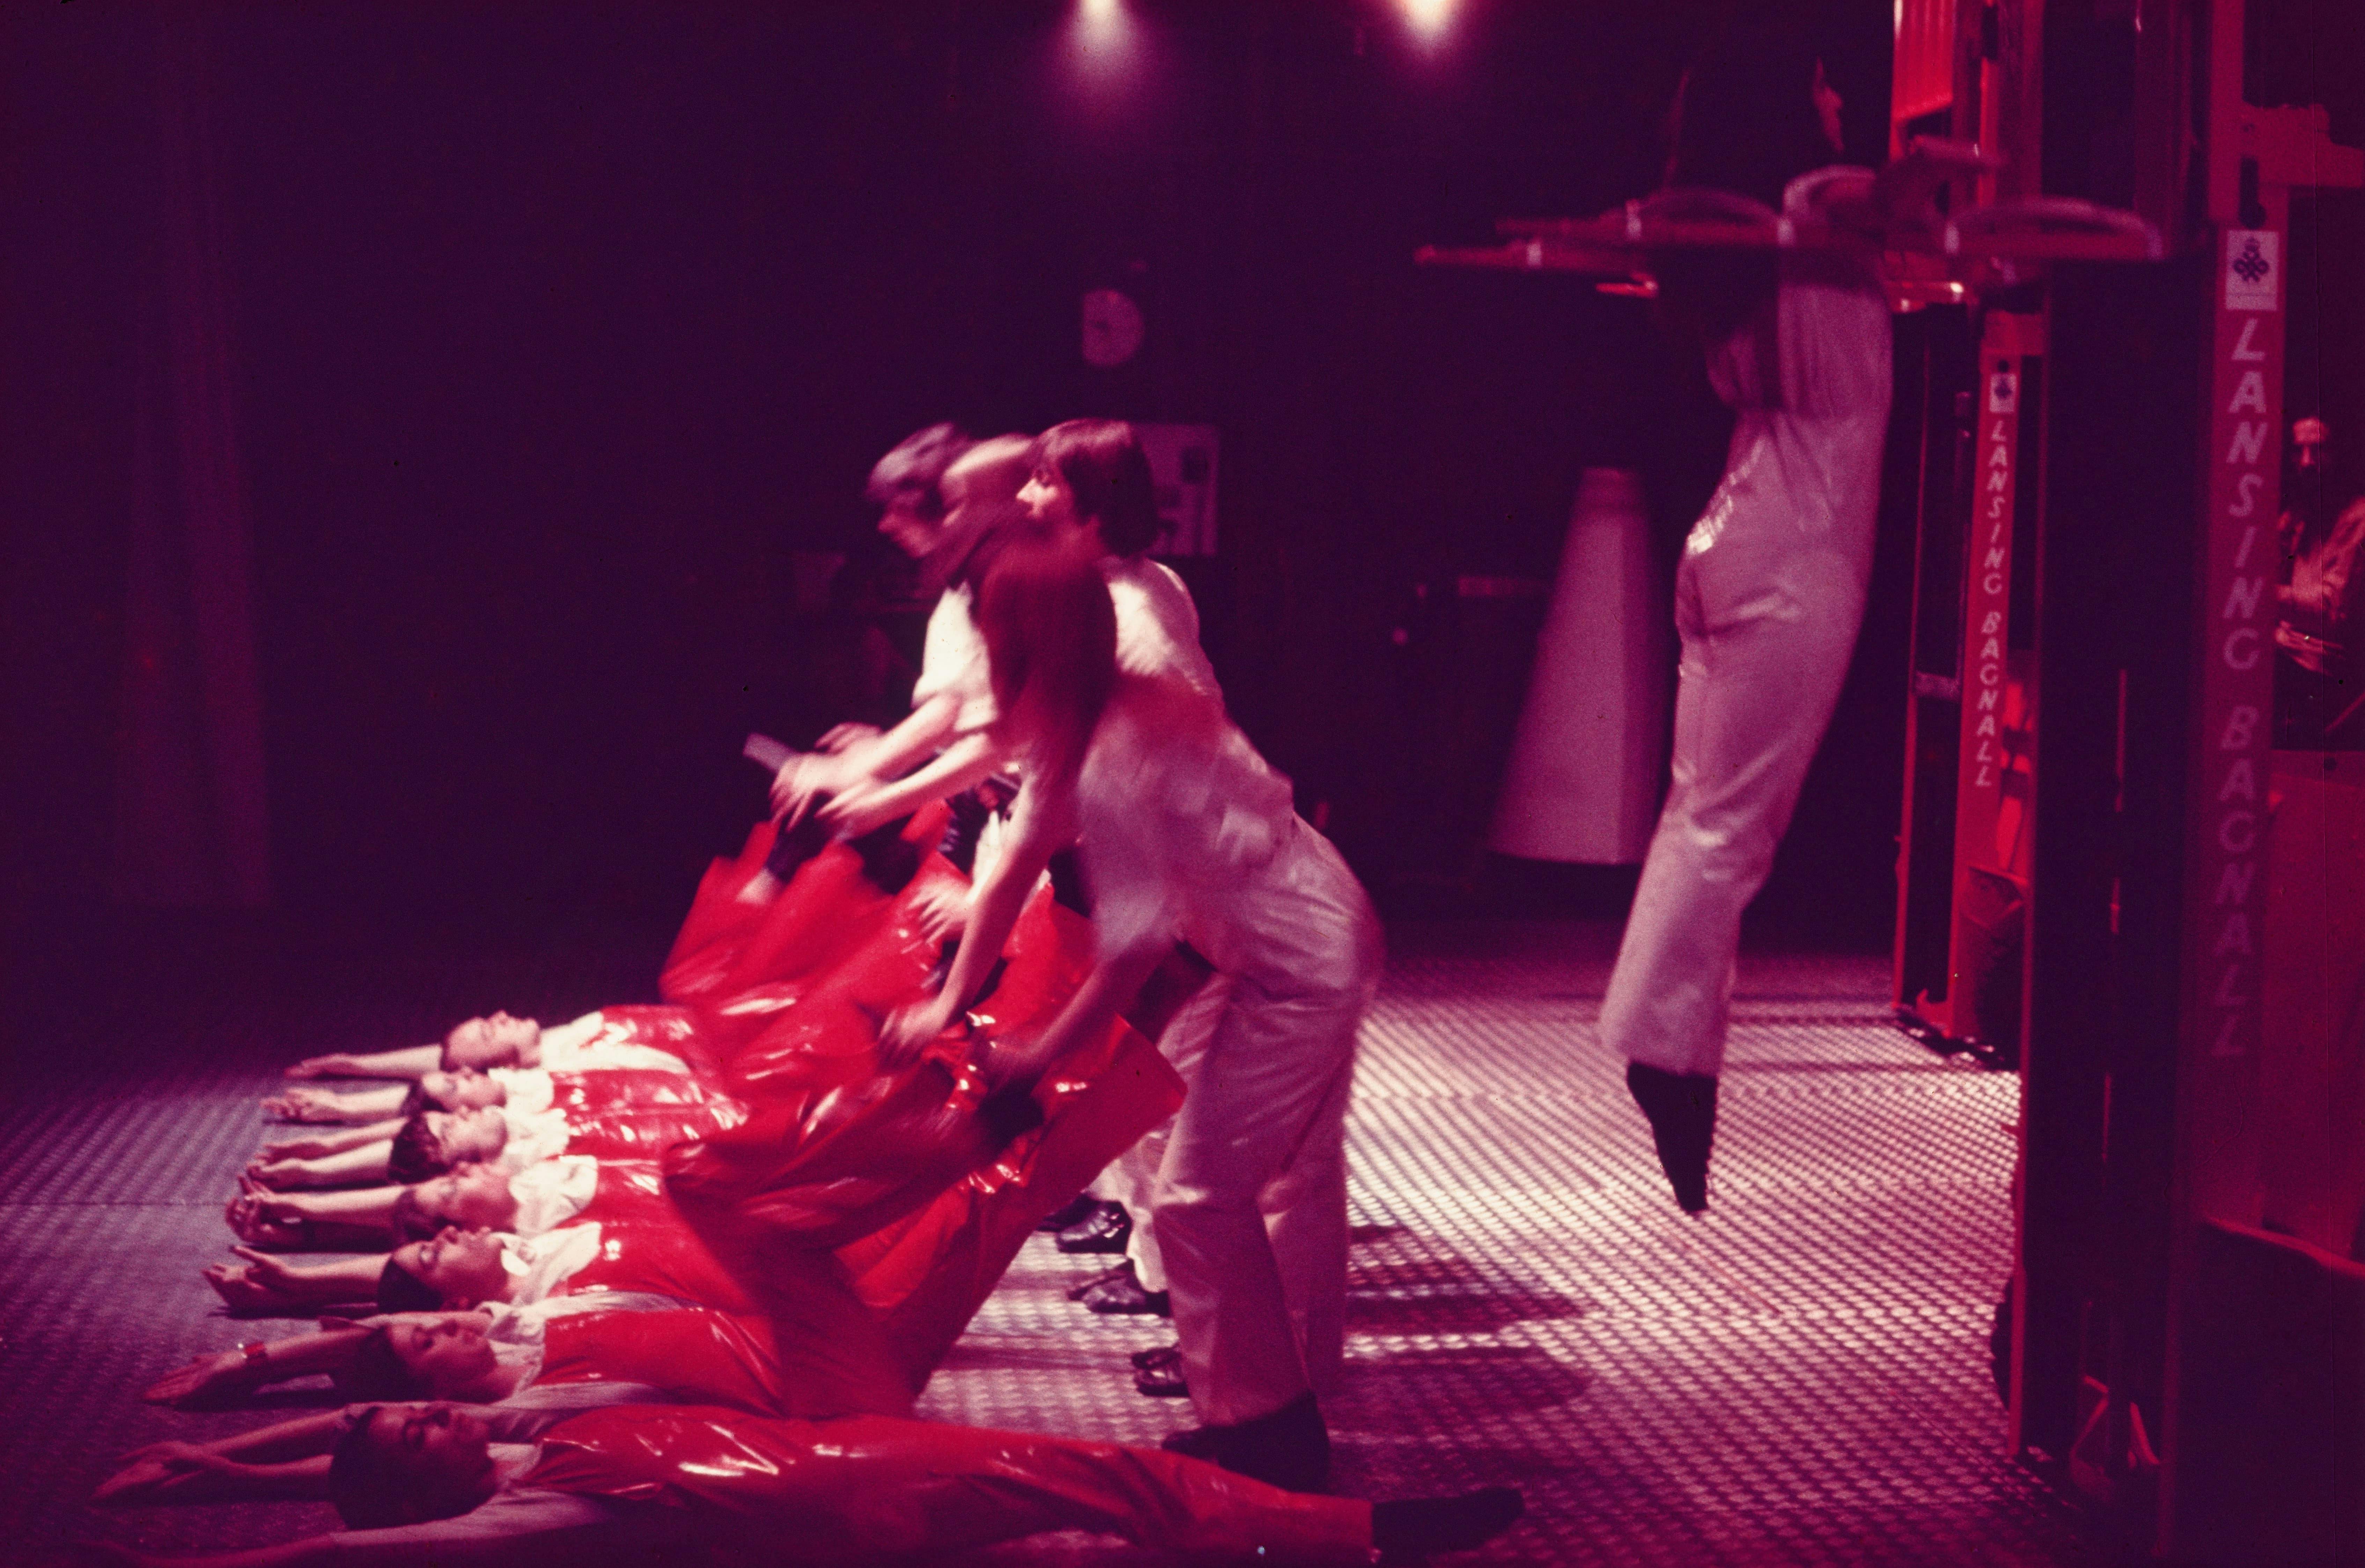 The image shows a color photograph taken during the 1970 performance of Leopoldo Maler’s X-IT2 at The Place in London. Performers wearing red vinyl costumes lie in a line on an industrial floor, their arms above their heads and their legs kicked up against a corresponding line of standing performers in white, who are holding their feet. Behind this group, another performer in white is suspended a few feet off the ground by the arms of a forklift. The performer has his arms outstretched and his legs held together in a pose evocative of crucifixion.